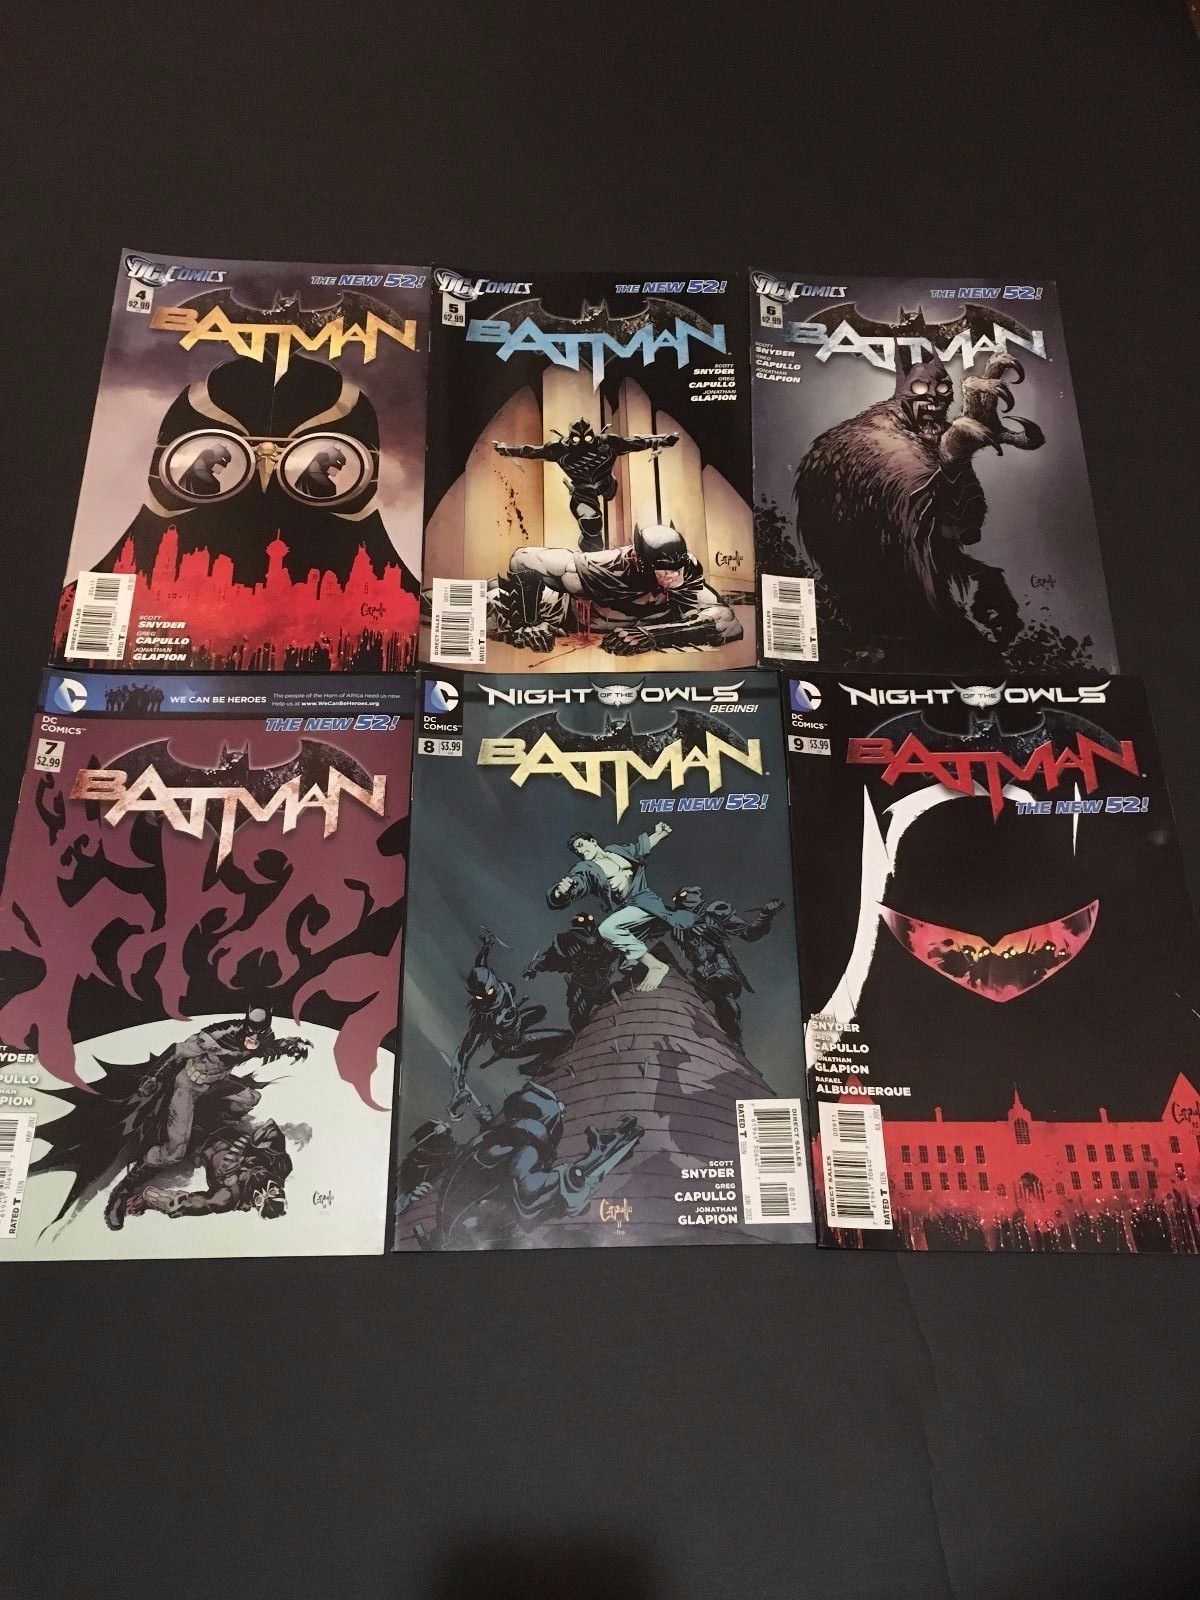 Batman: The New 52 Lot of 6 Books First Print (4,5,6,7,8,9,) VF/NM FREE SHIPPING